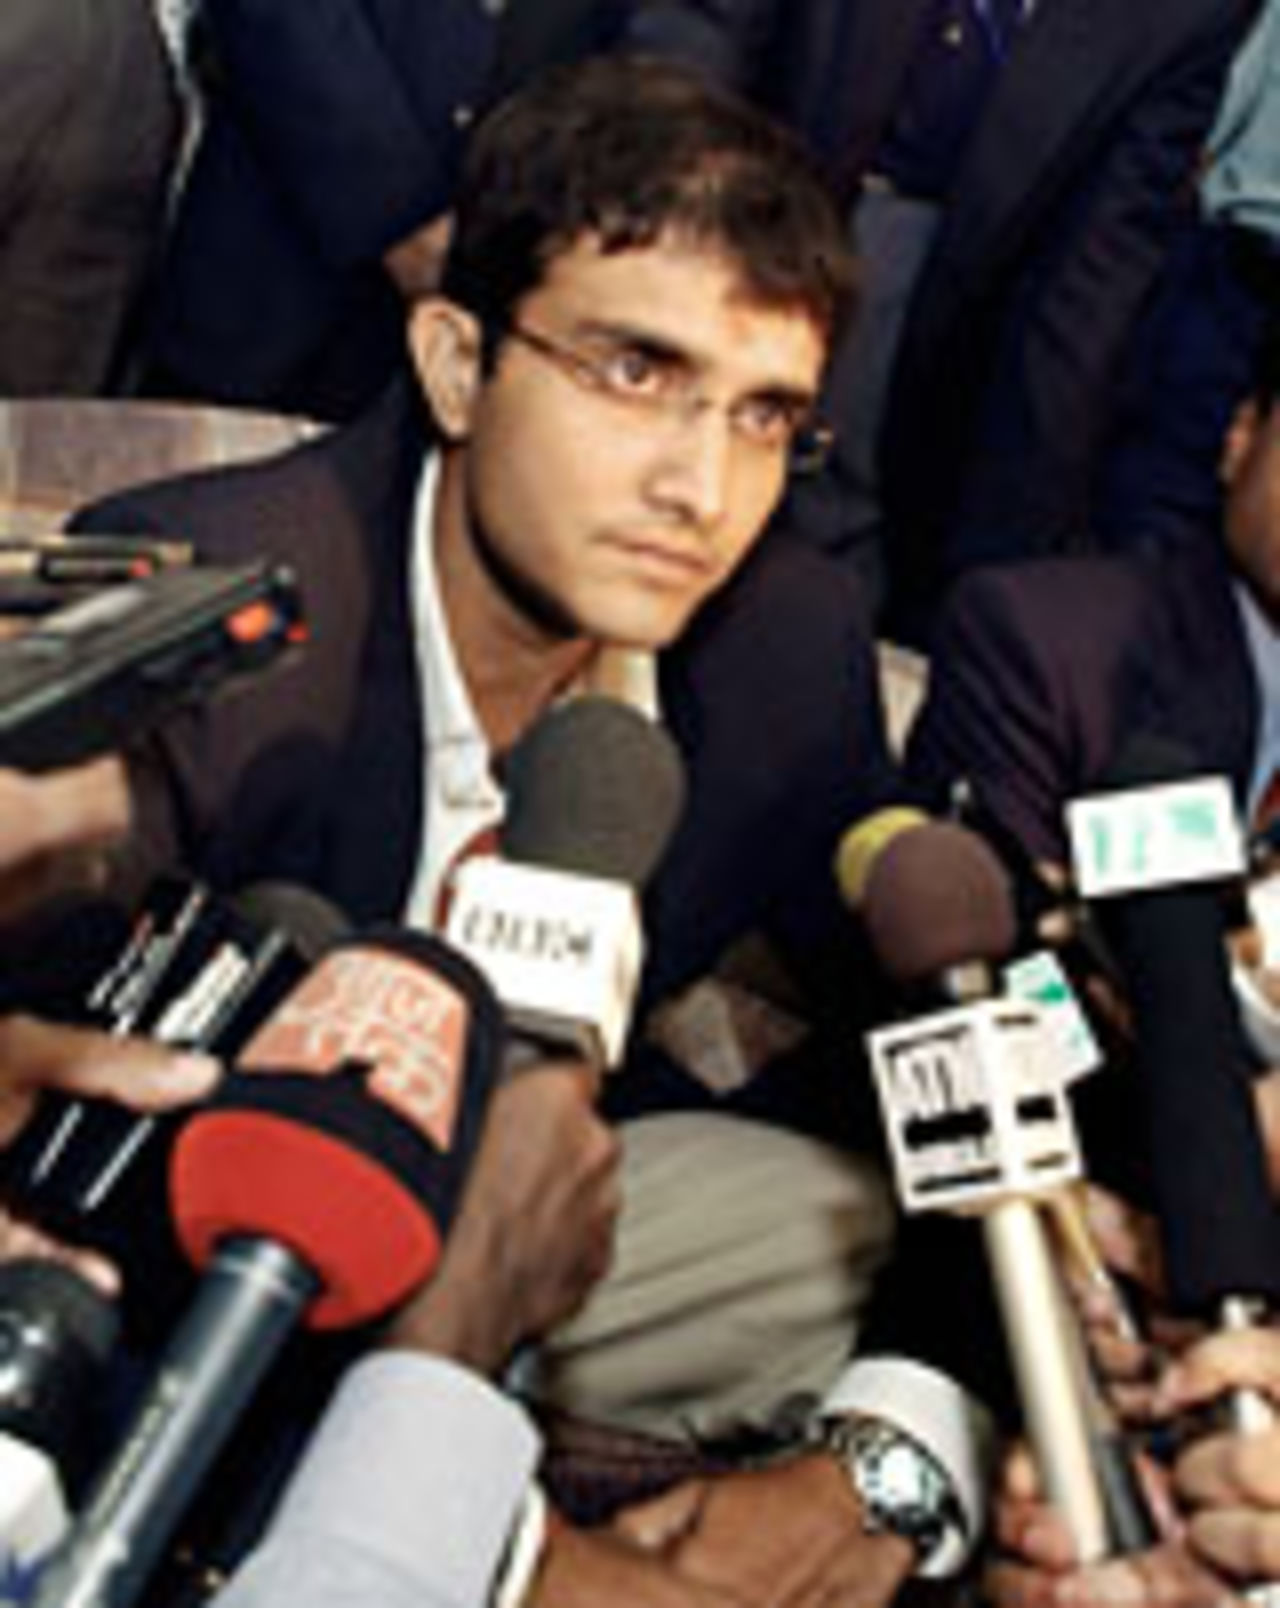 Sourav Ganguly faces questions on his arrival in Dhaka, December 8 2004